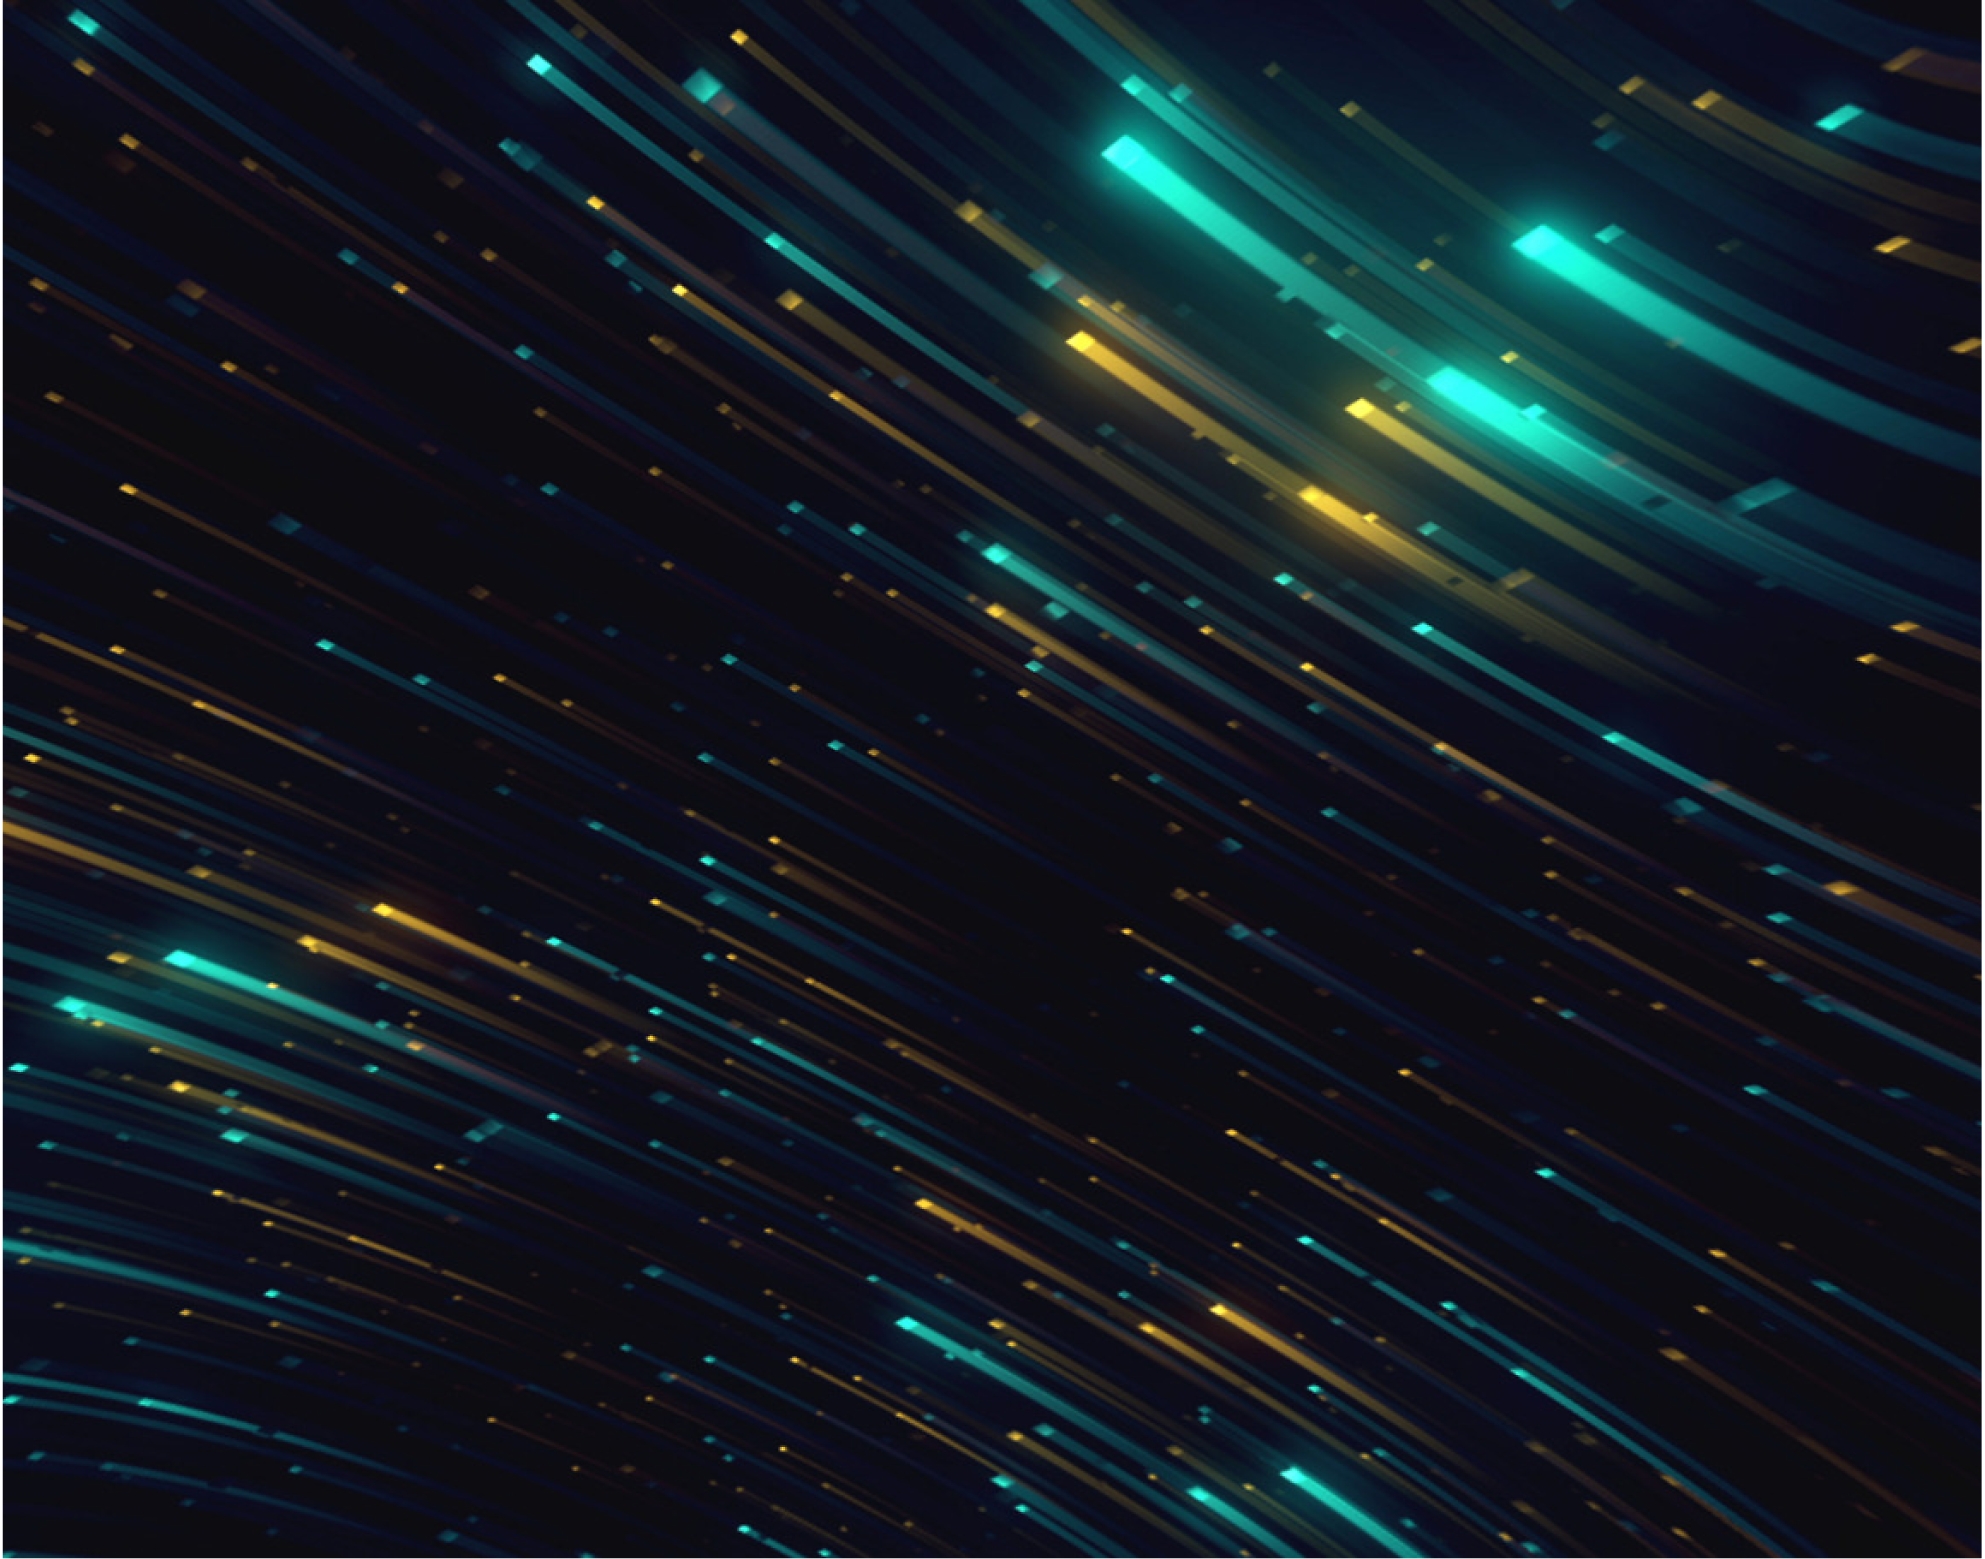 Abstract image showing streaks of blue and yellow lights against a dark background